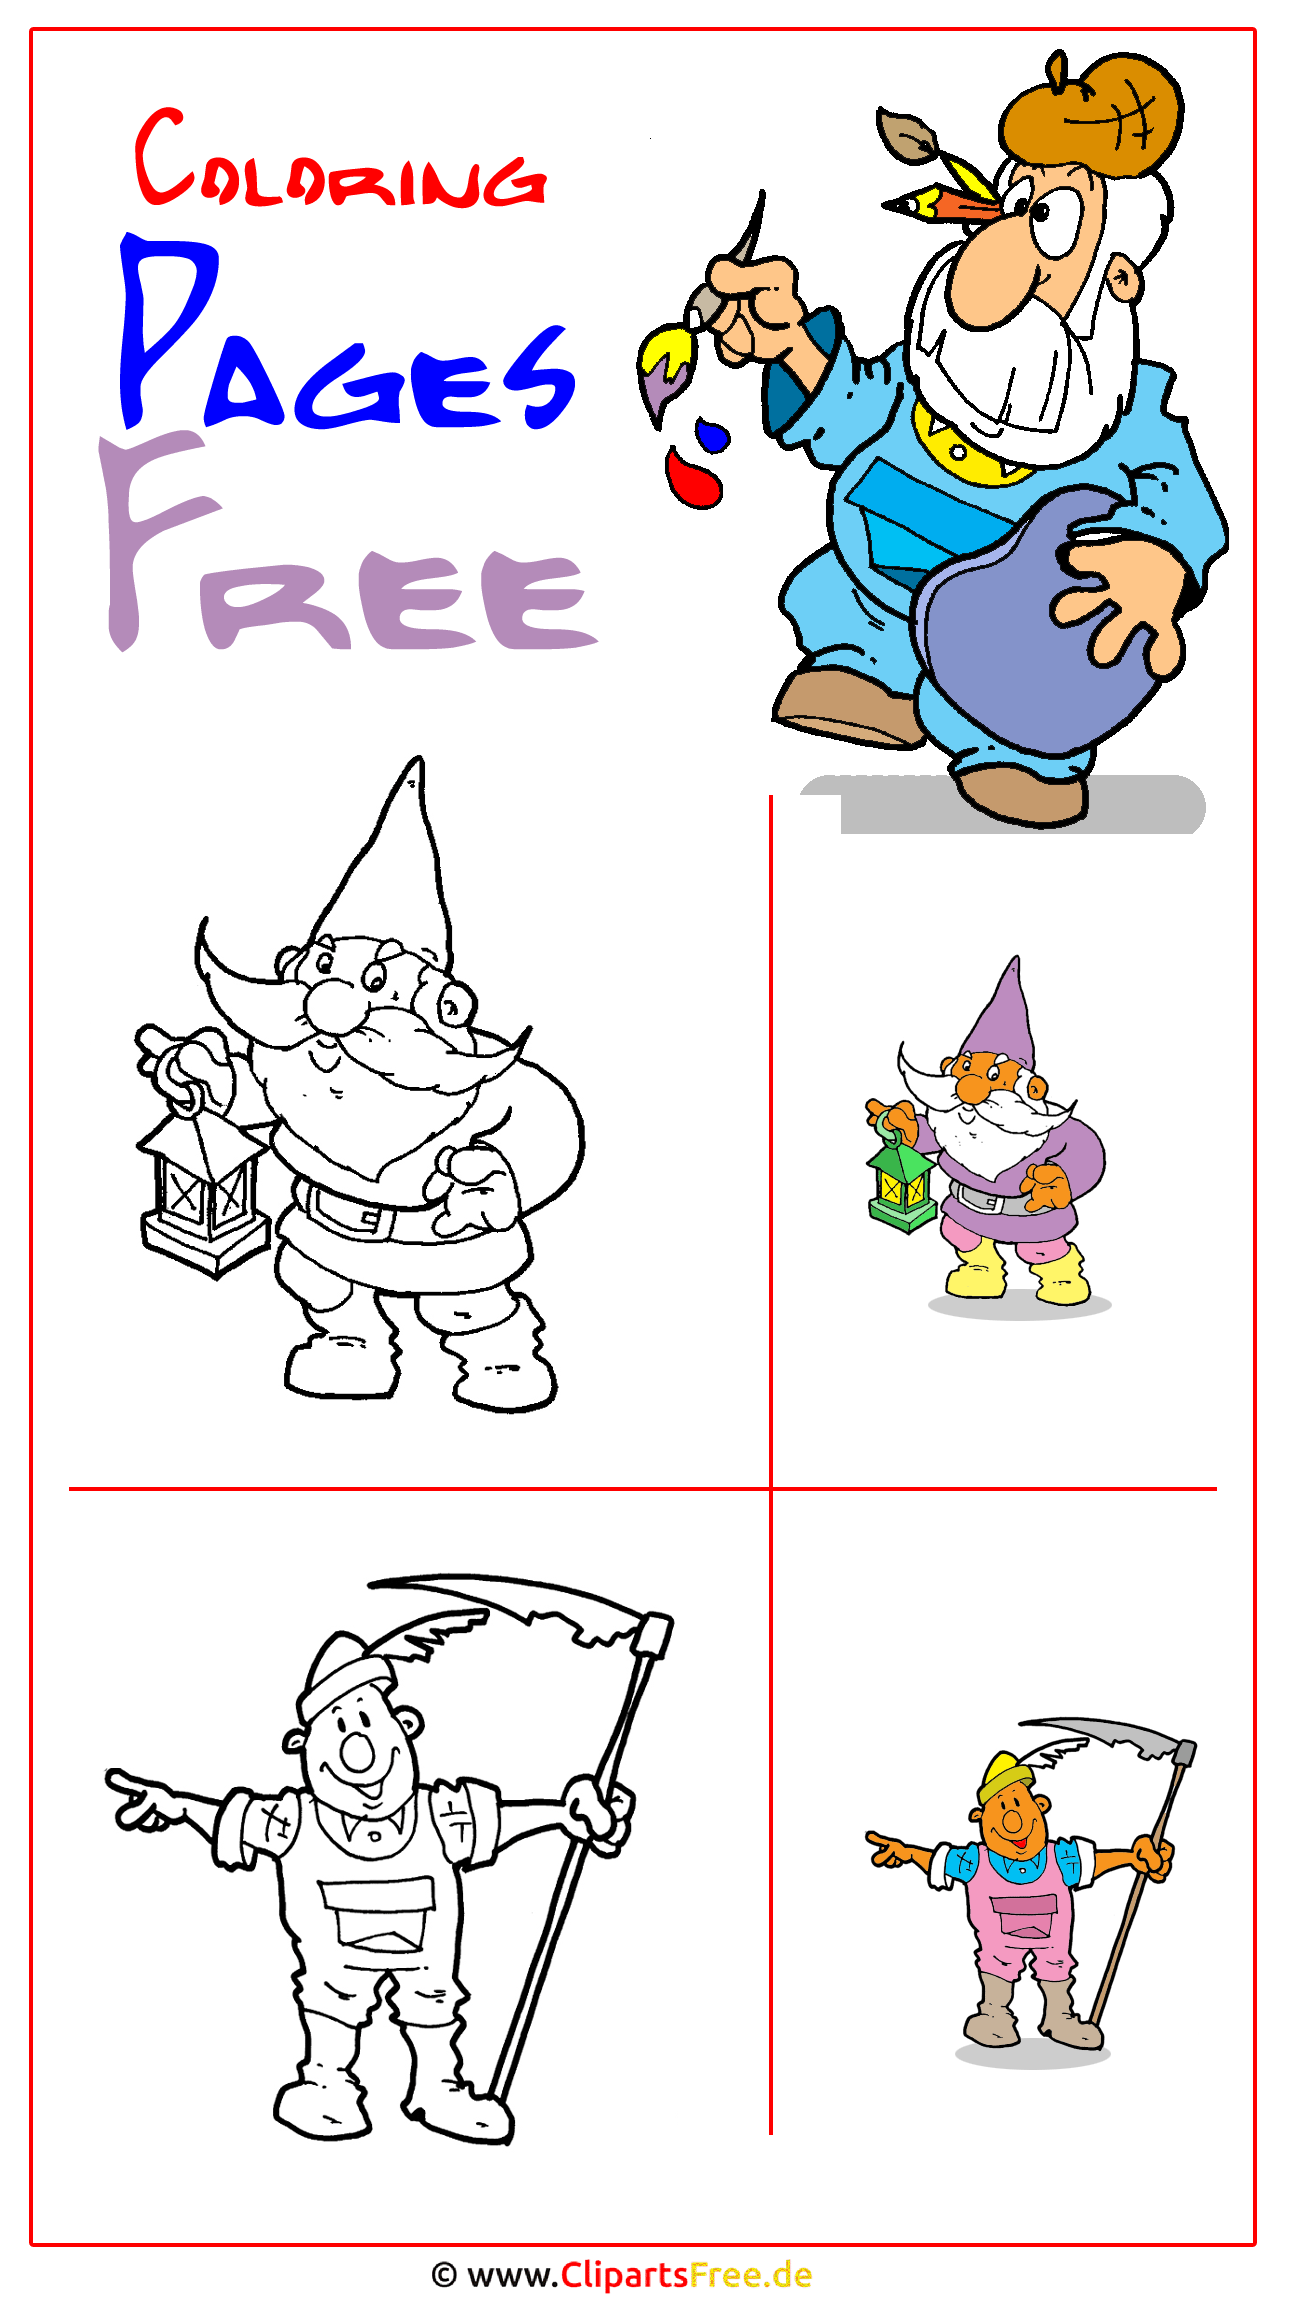 coloring-pages-free-download-poster